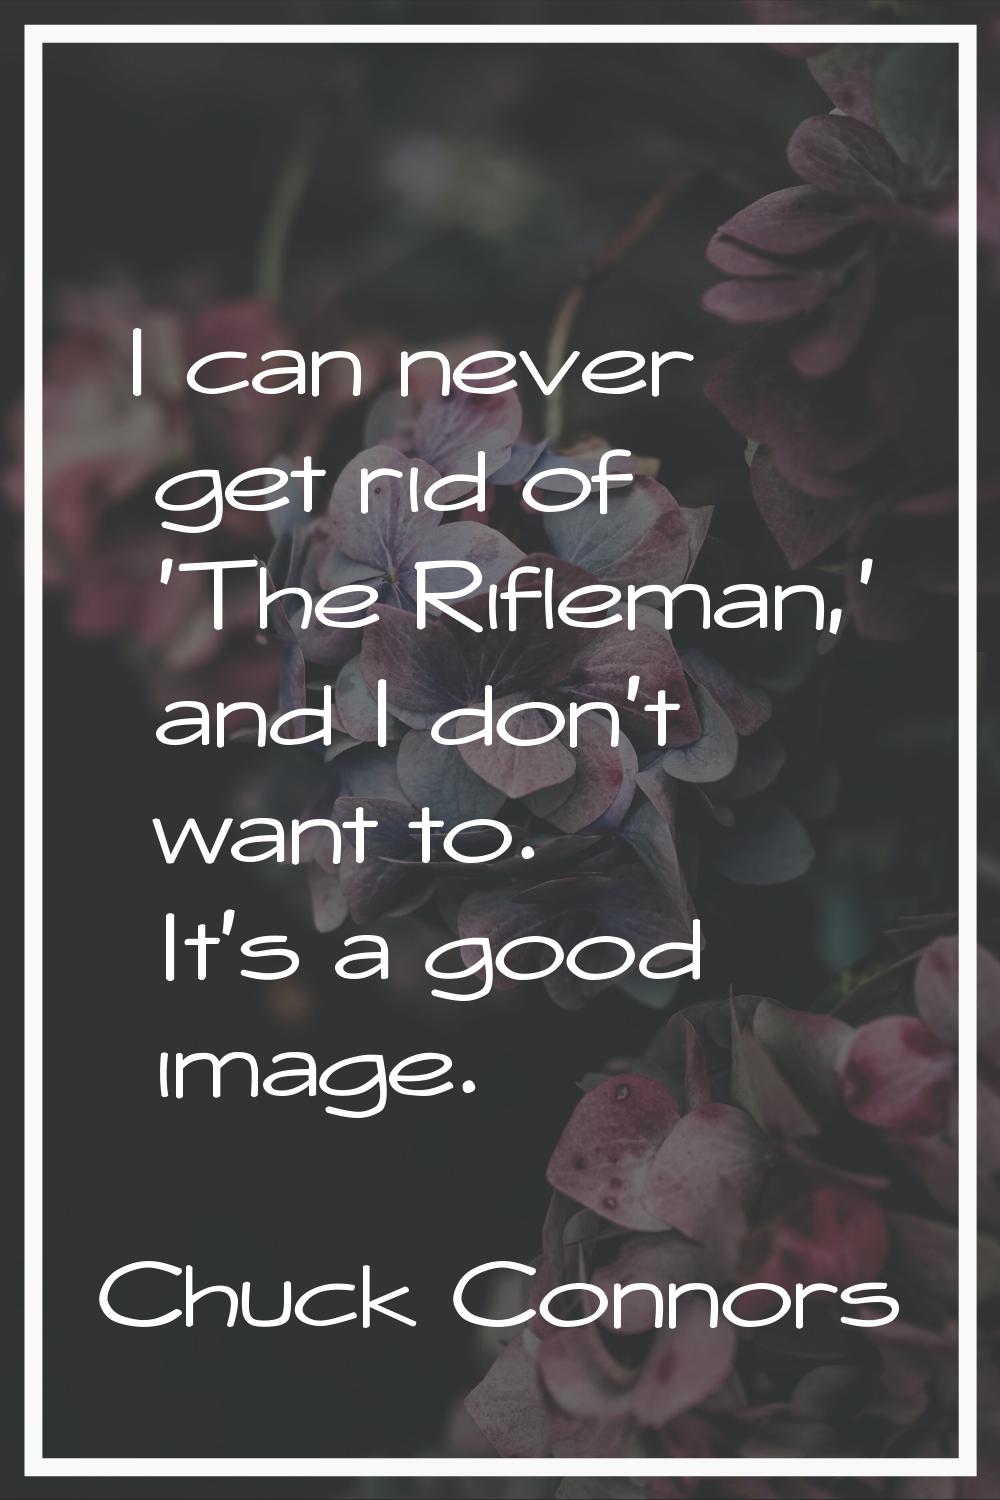 I can never get rid of 'The Rifleman,' and I don't want to. It's a good image.